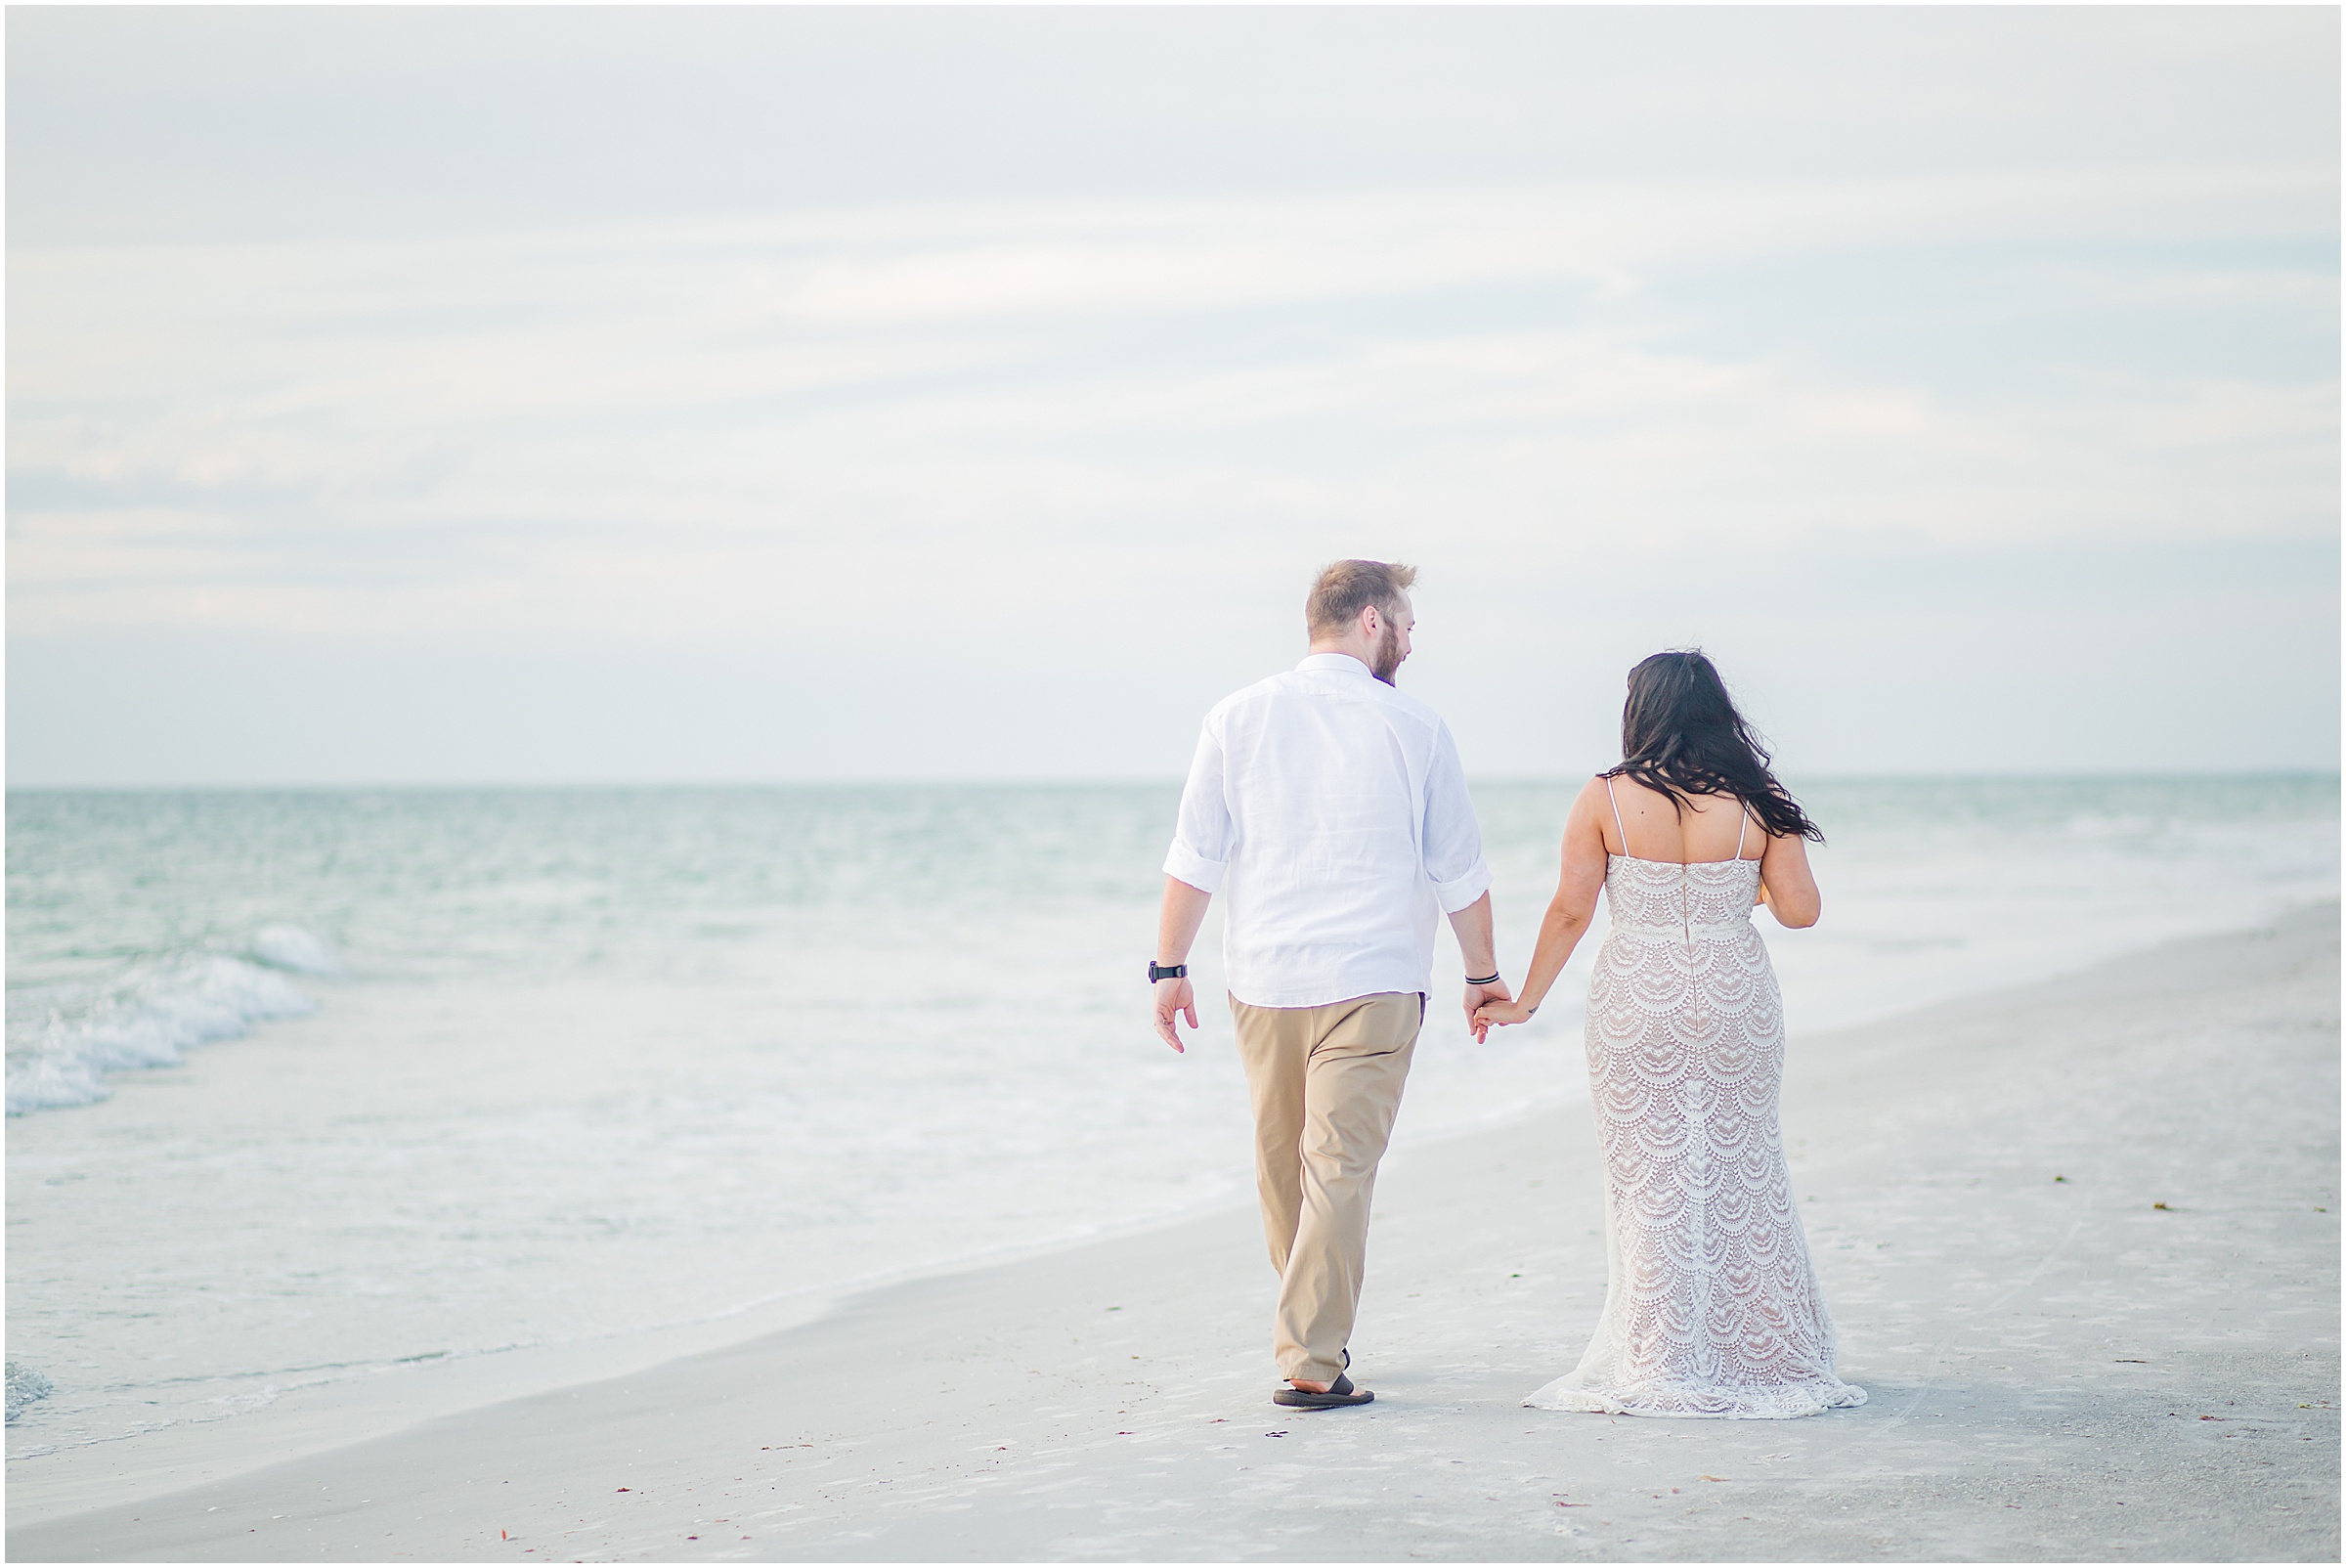 Marci & Justin Hobart tied the knot at their April Destination Beach Wedding in Indian Rocks, FL.